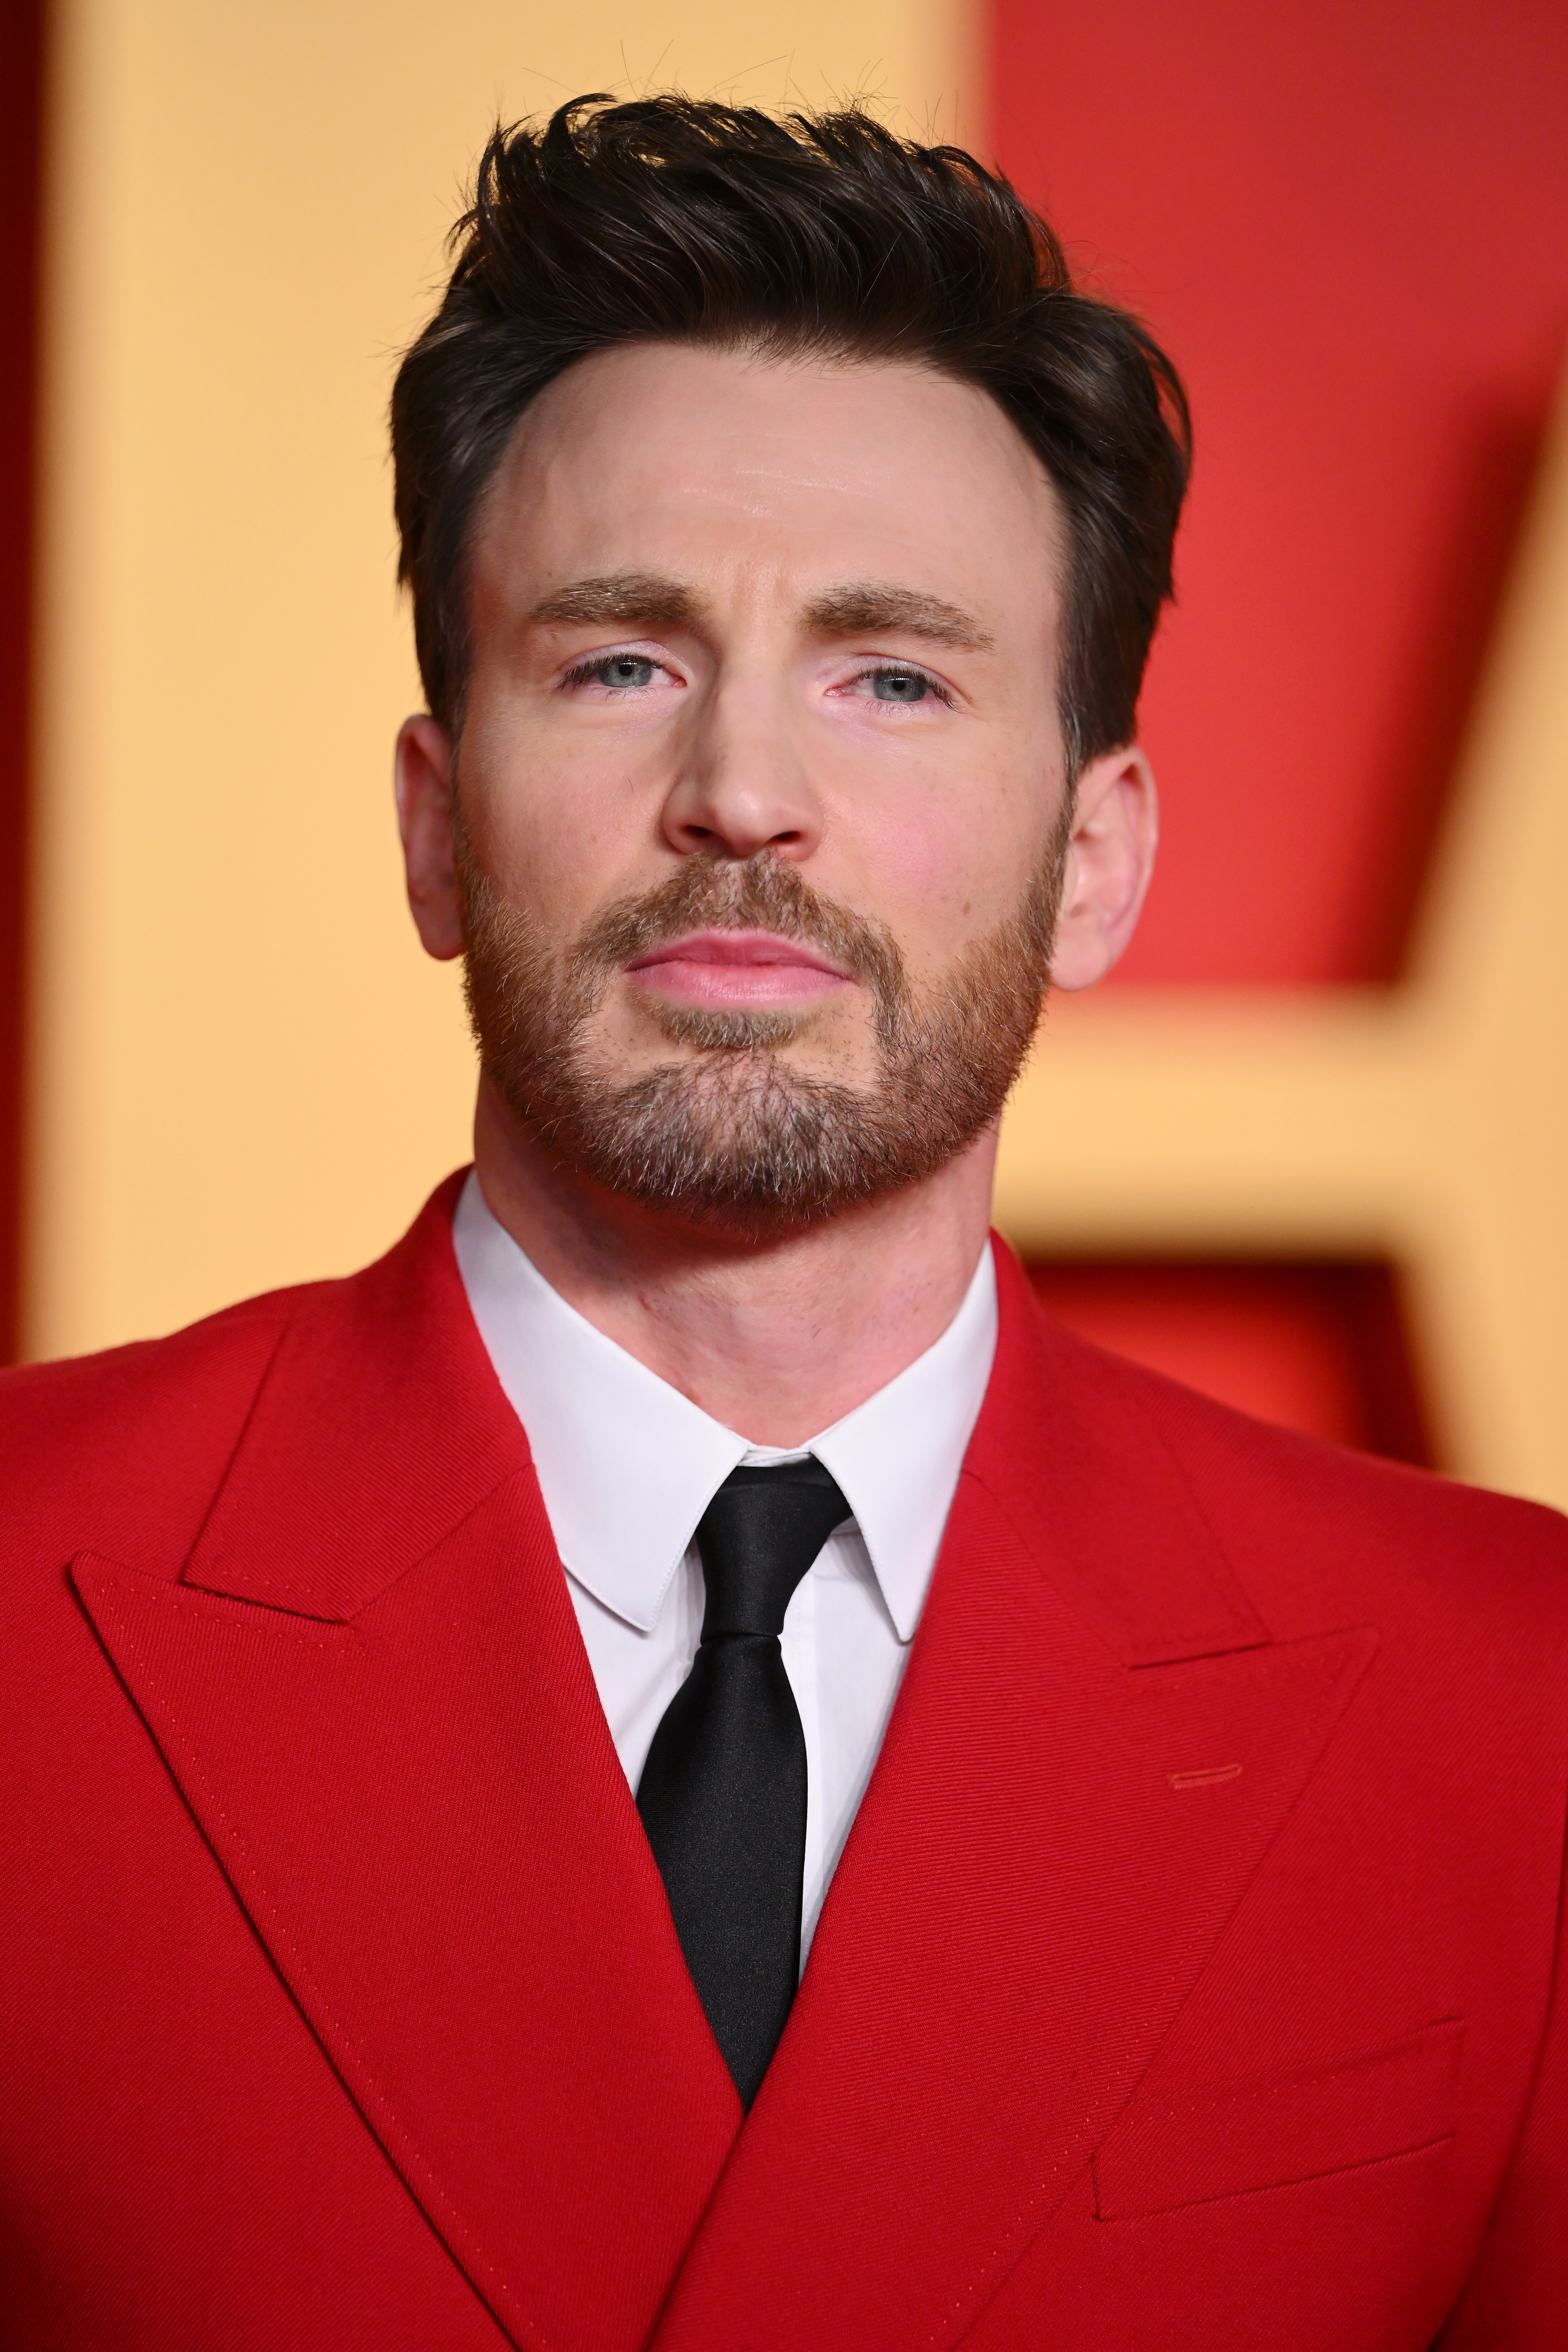 A close-up of Chris on the red carpet